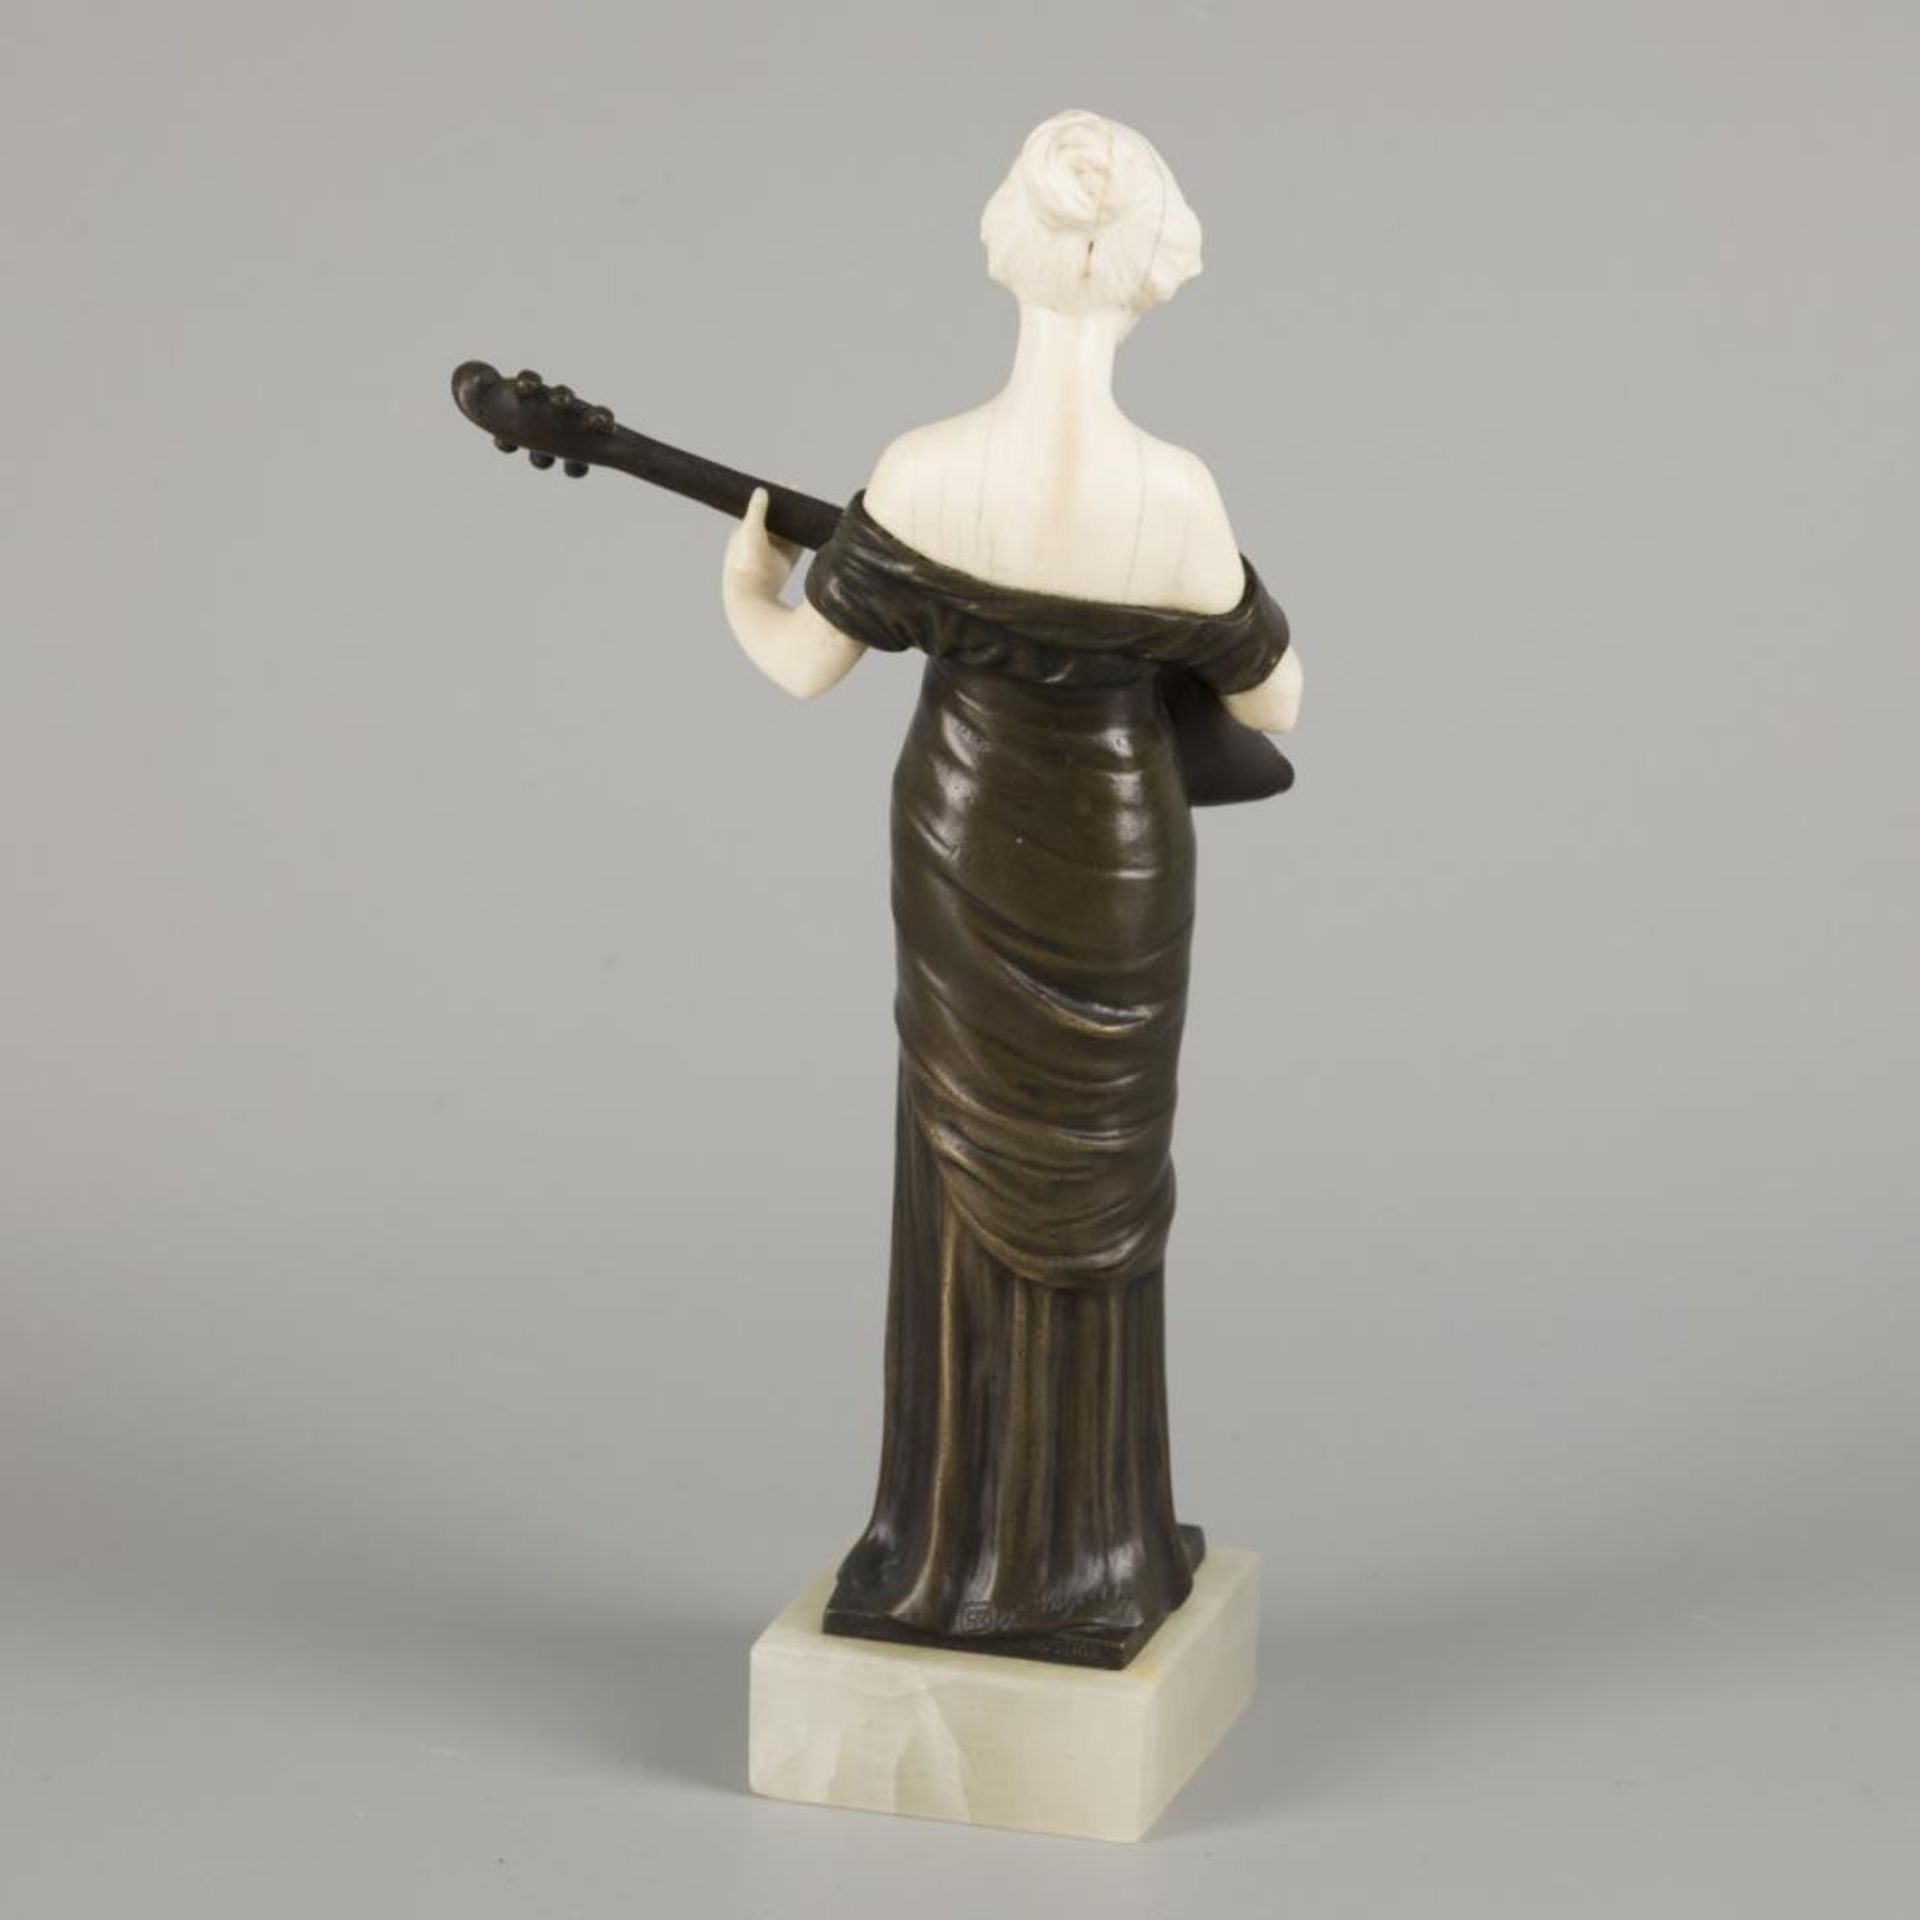 Ferdinand Lugerth (1885 - 1915), a bronze statuette of a guitar playing lady, Austria, ca. 1900. - Image 4 of 4